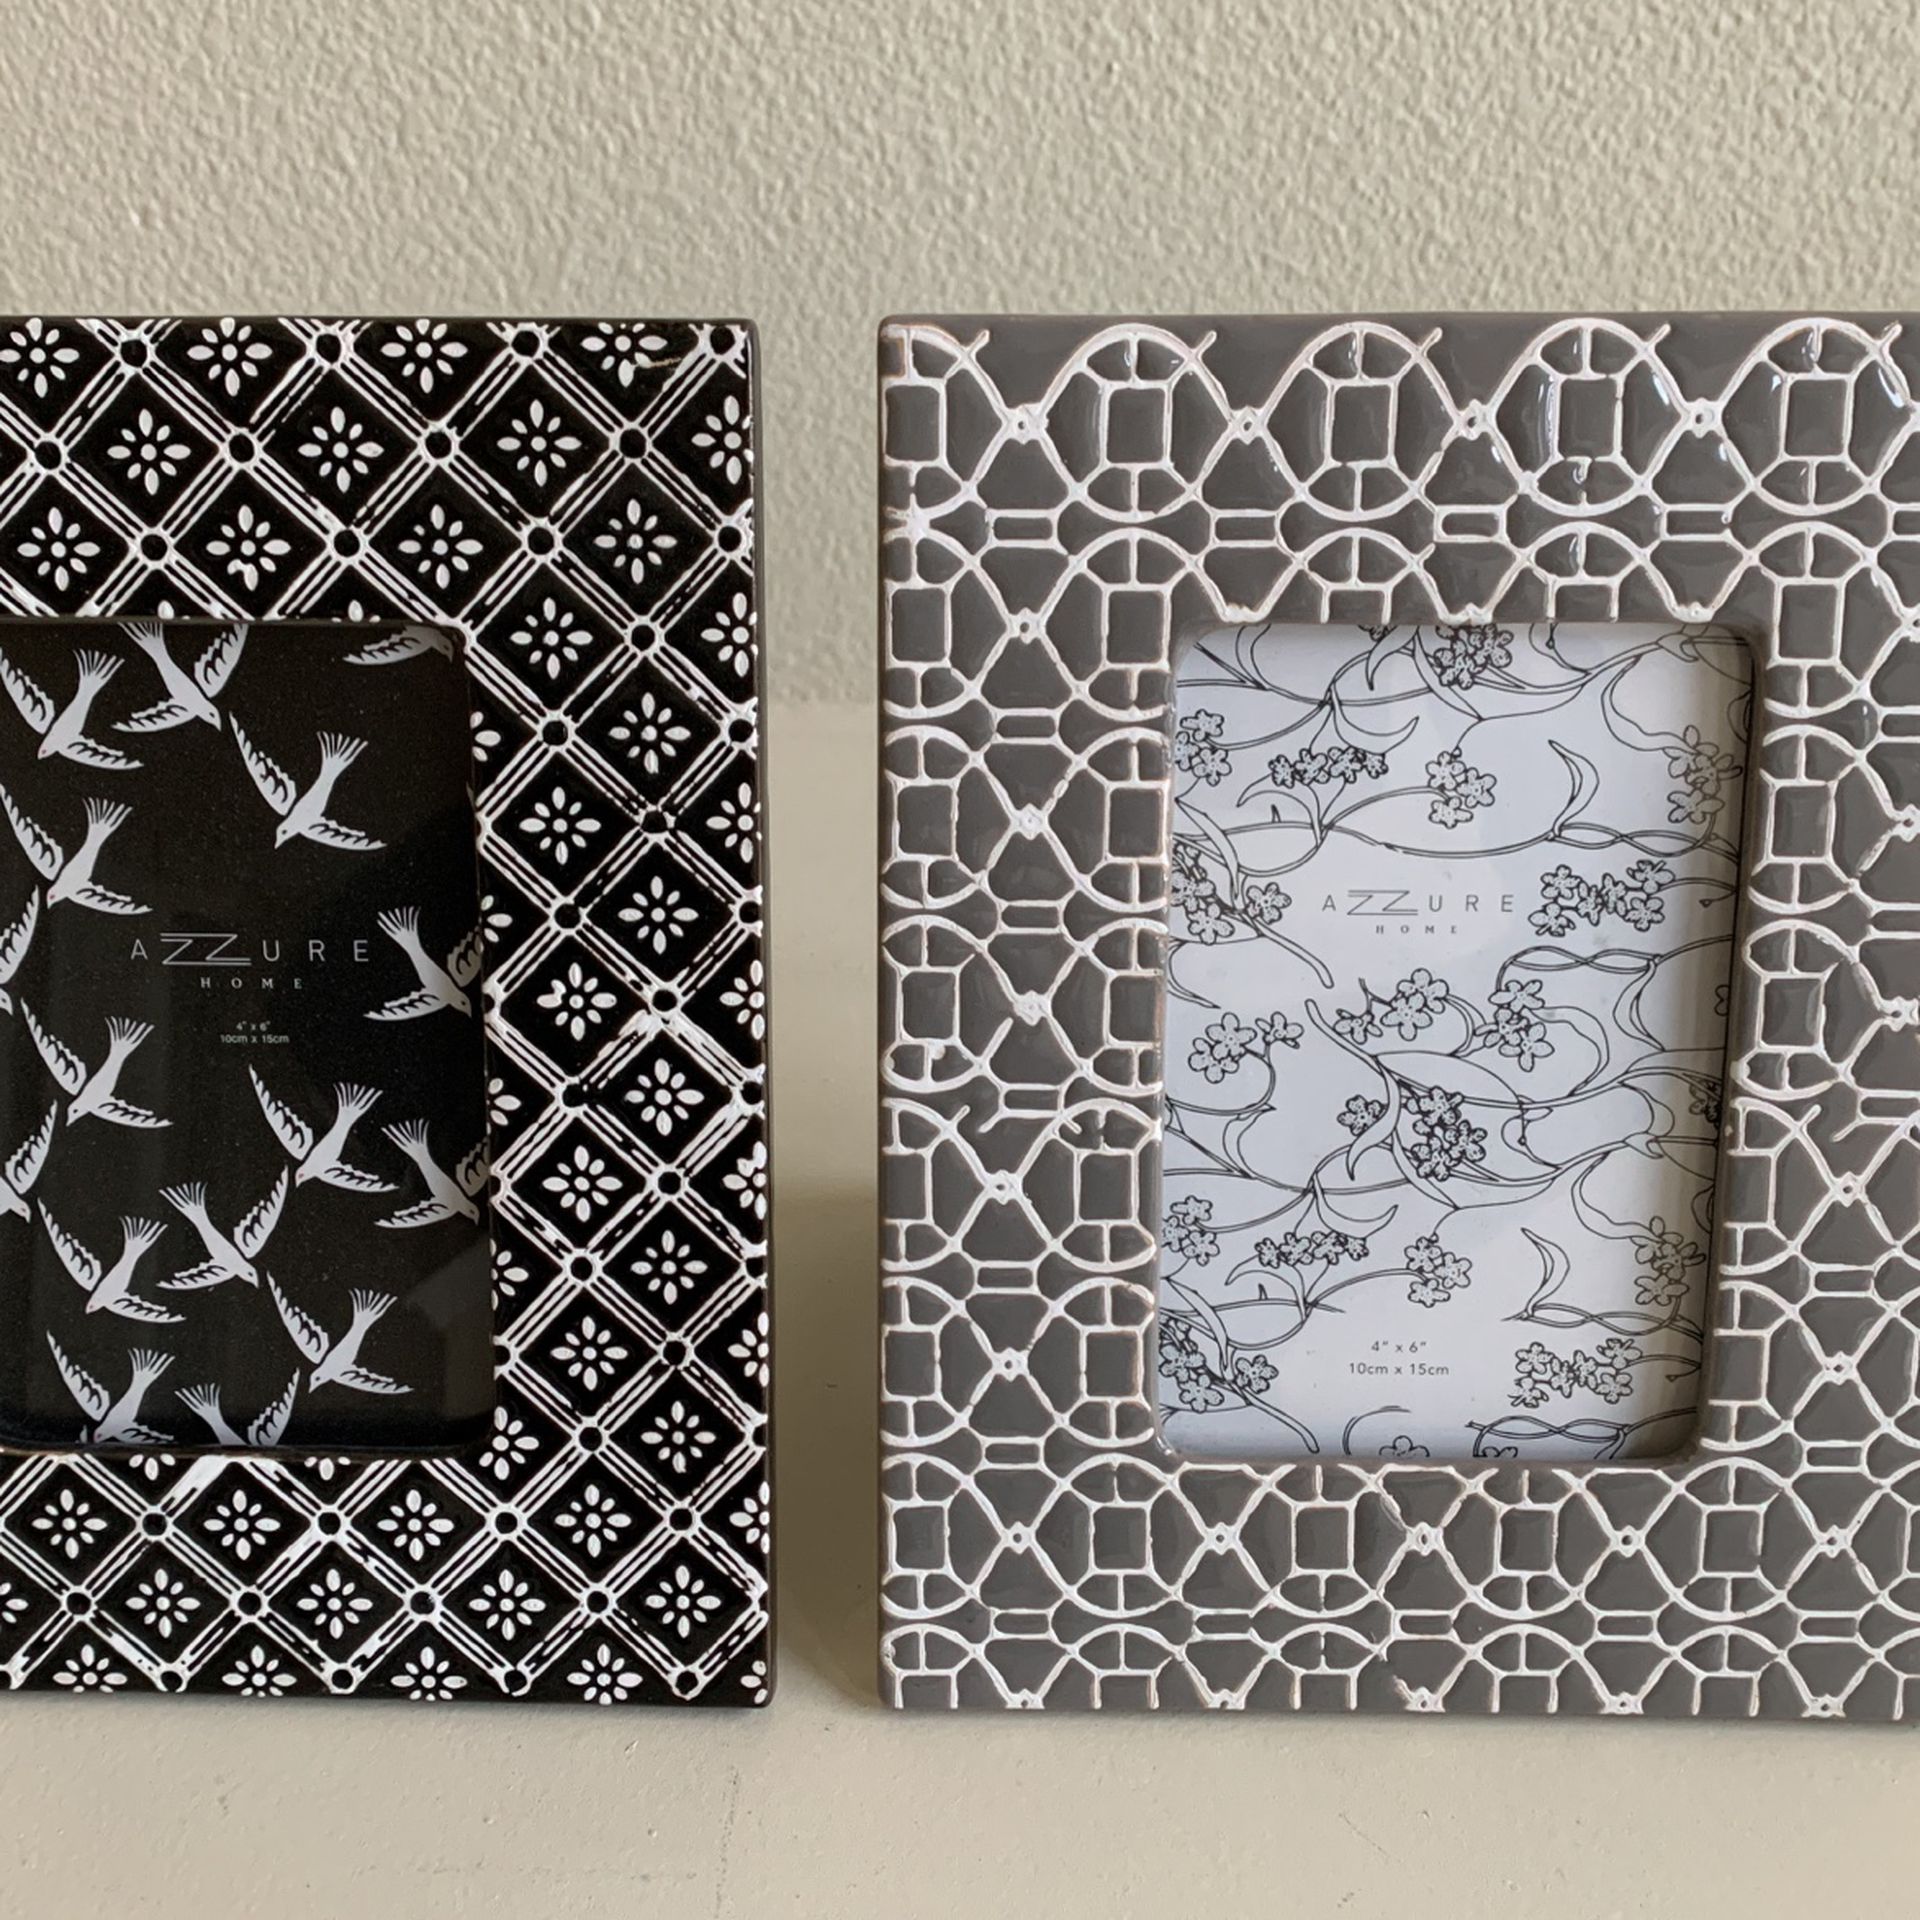 Moroccan Inspired Picture Frames - New